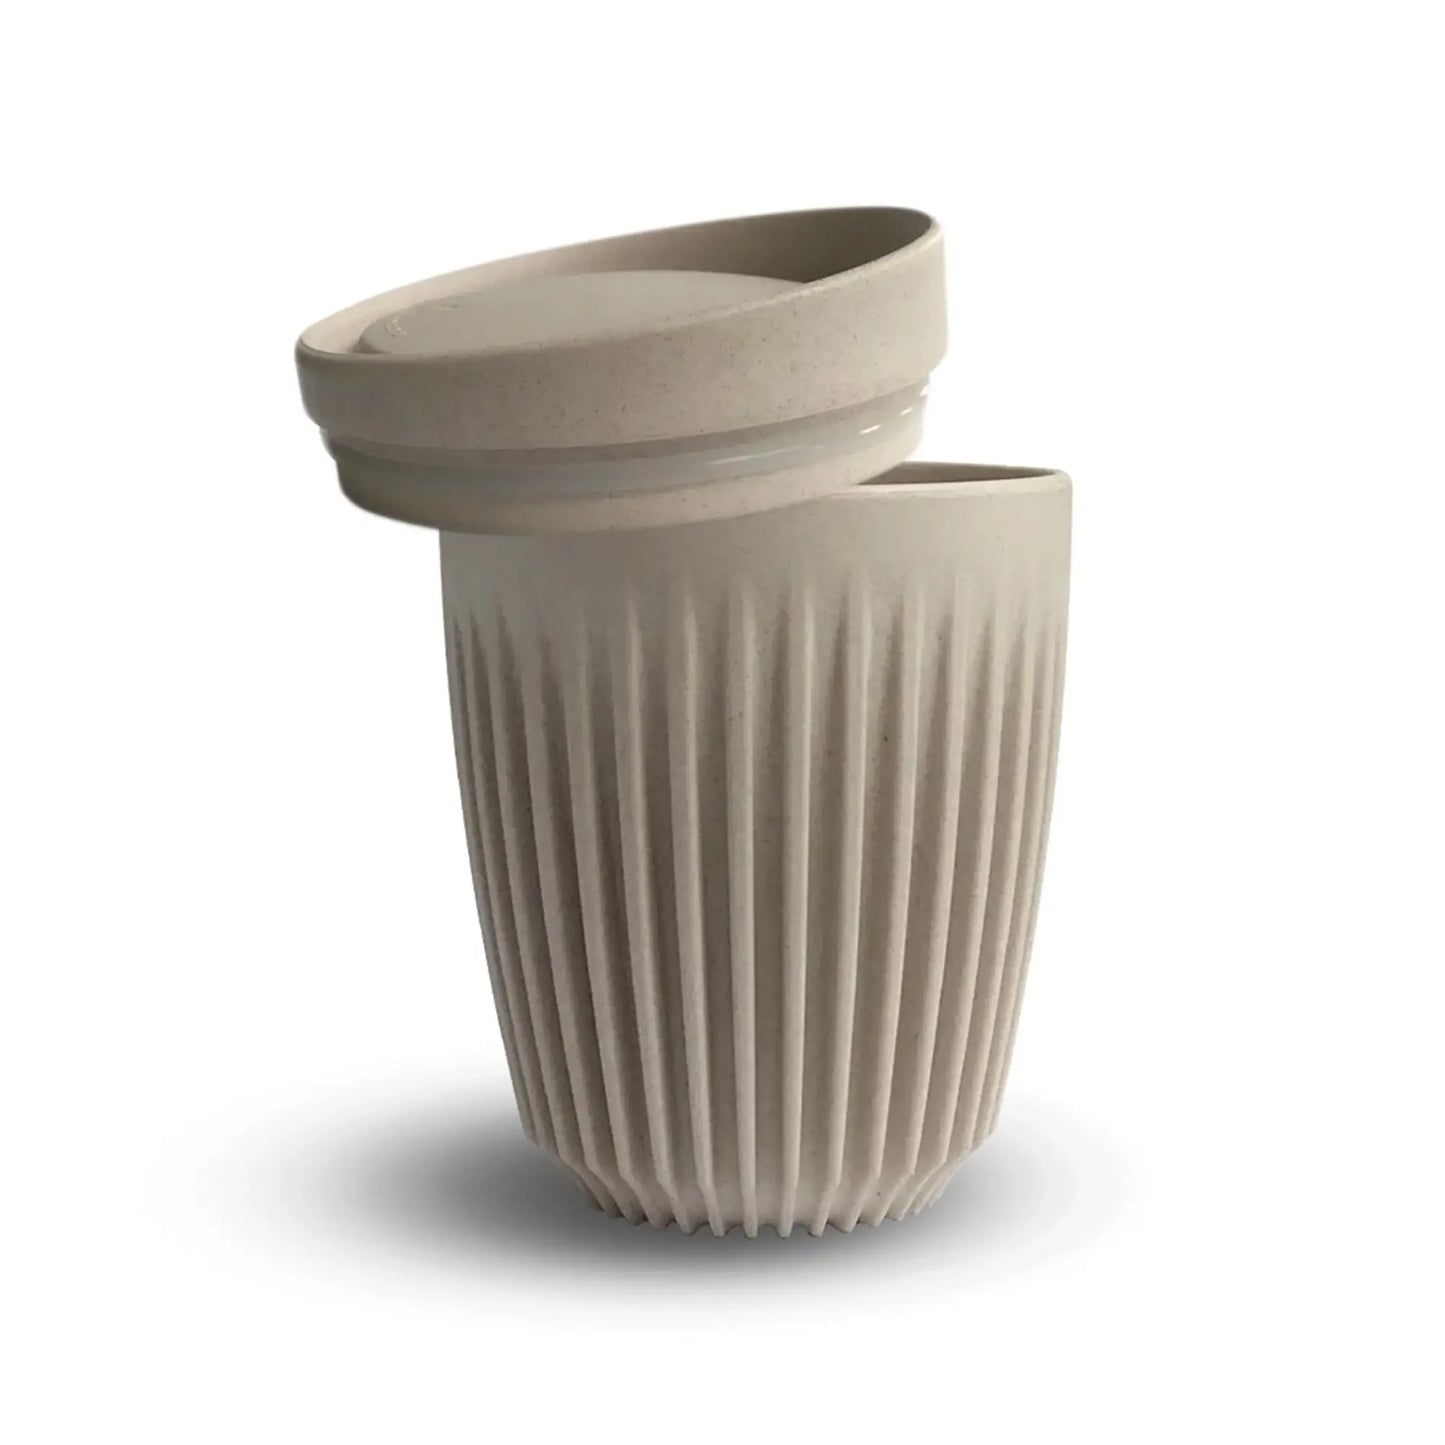 Huskee cup with lid - 235 ml (8 oz) - Natural.